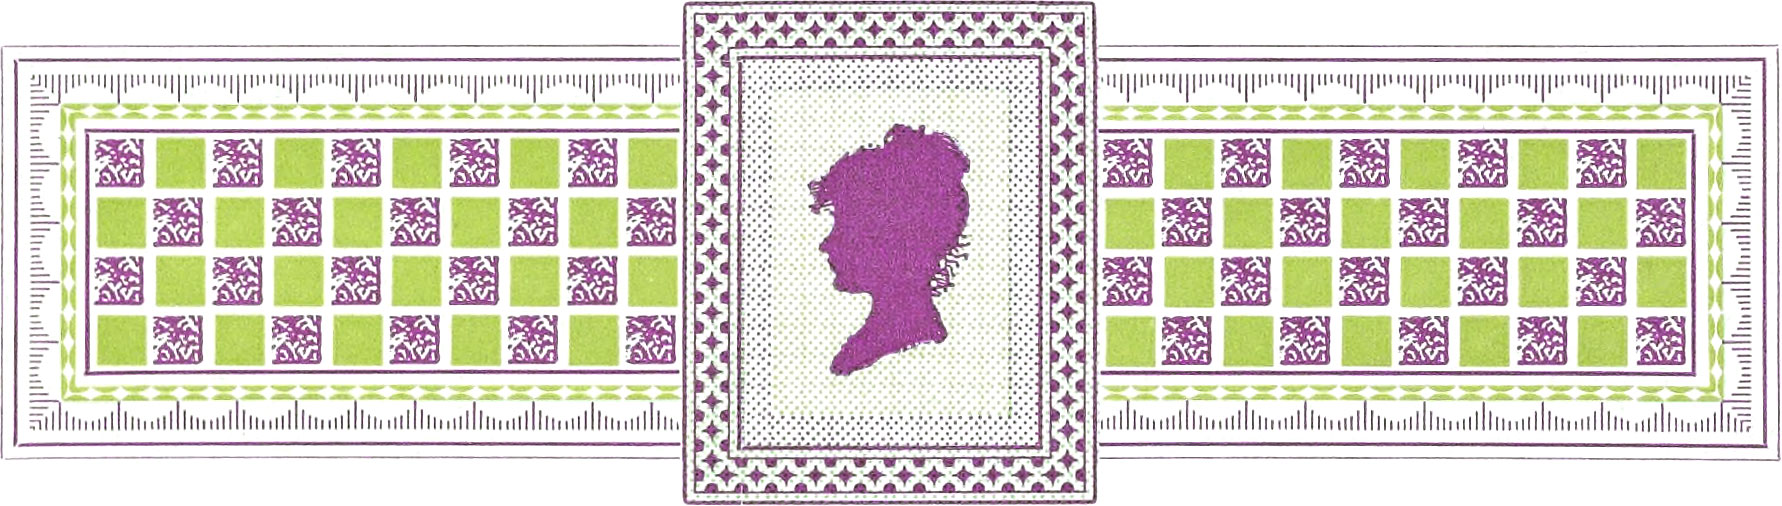 Checkered border with a female silhouette in the middle surrounded by a border comprising purple and green colors